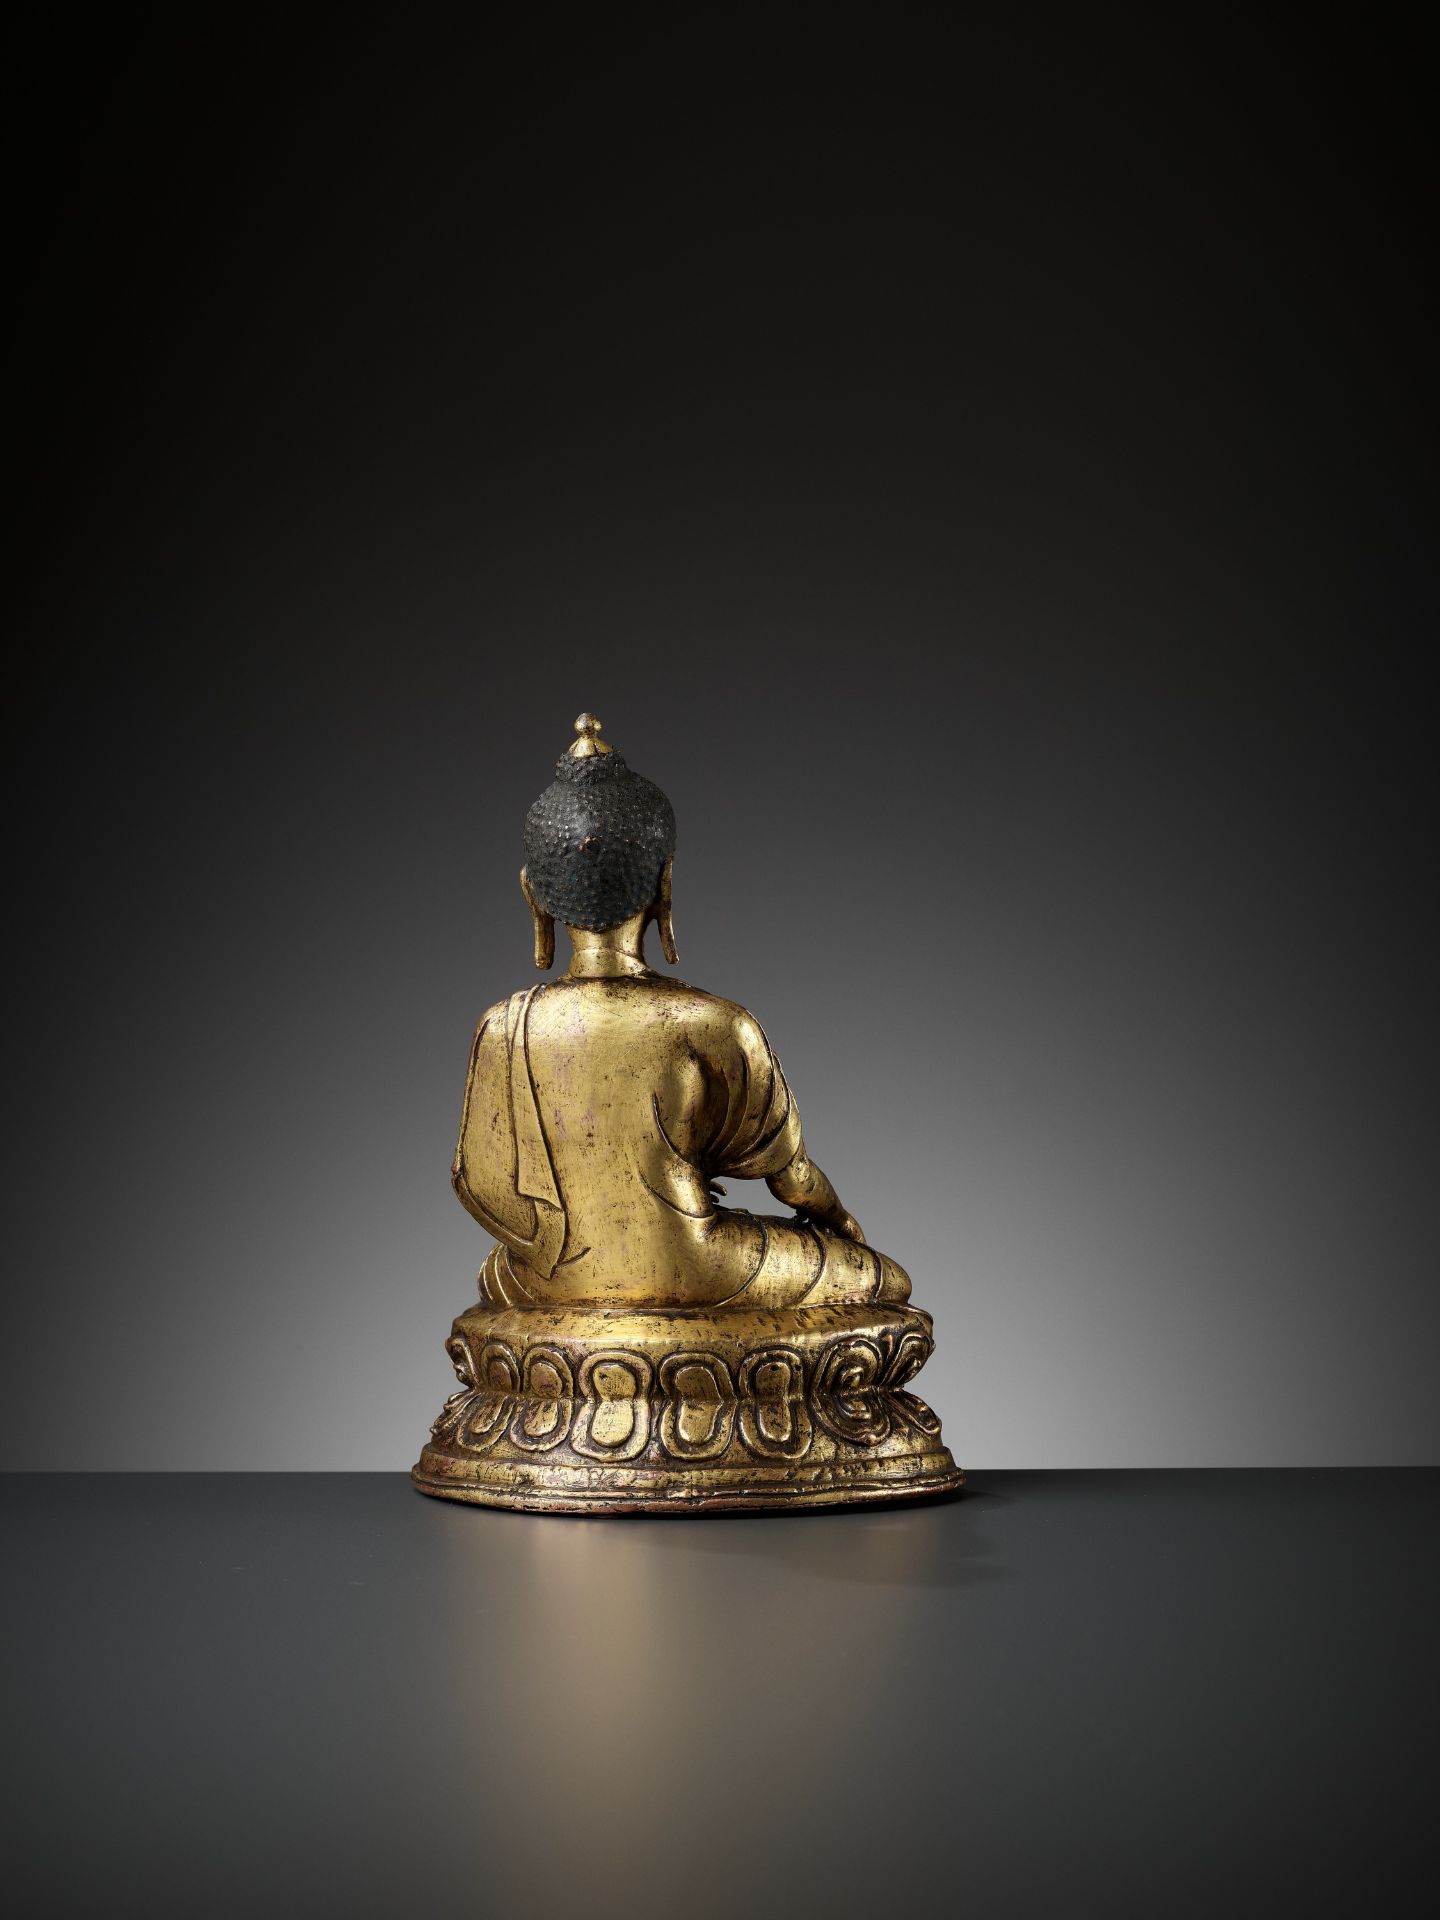 A GILT COPPER ALLOY FIGURE OF BUDDHA, 11TH-12TH CENTURY - Image 8 of 17